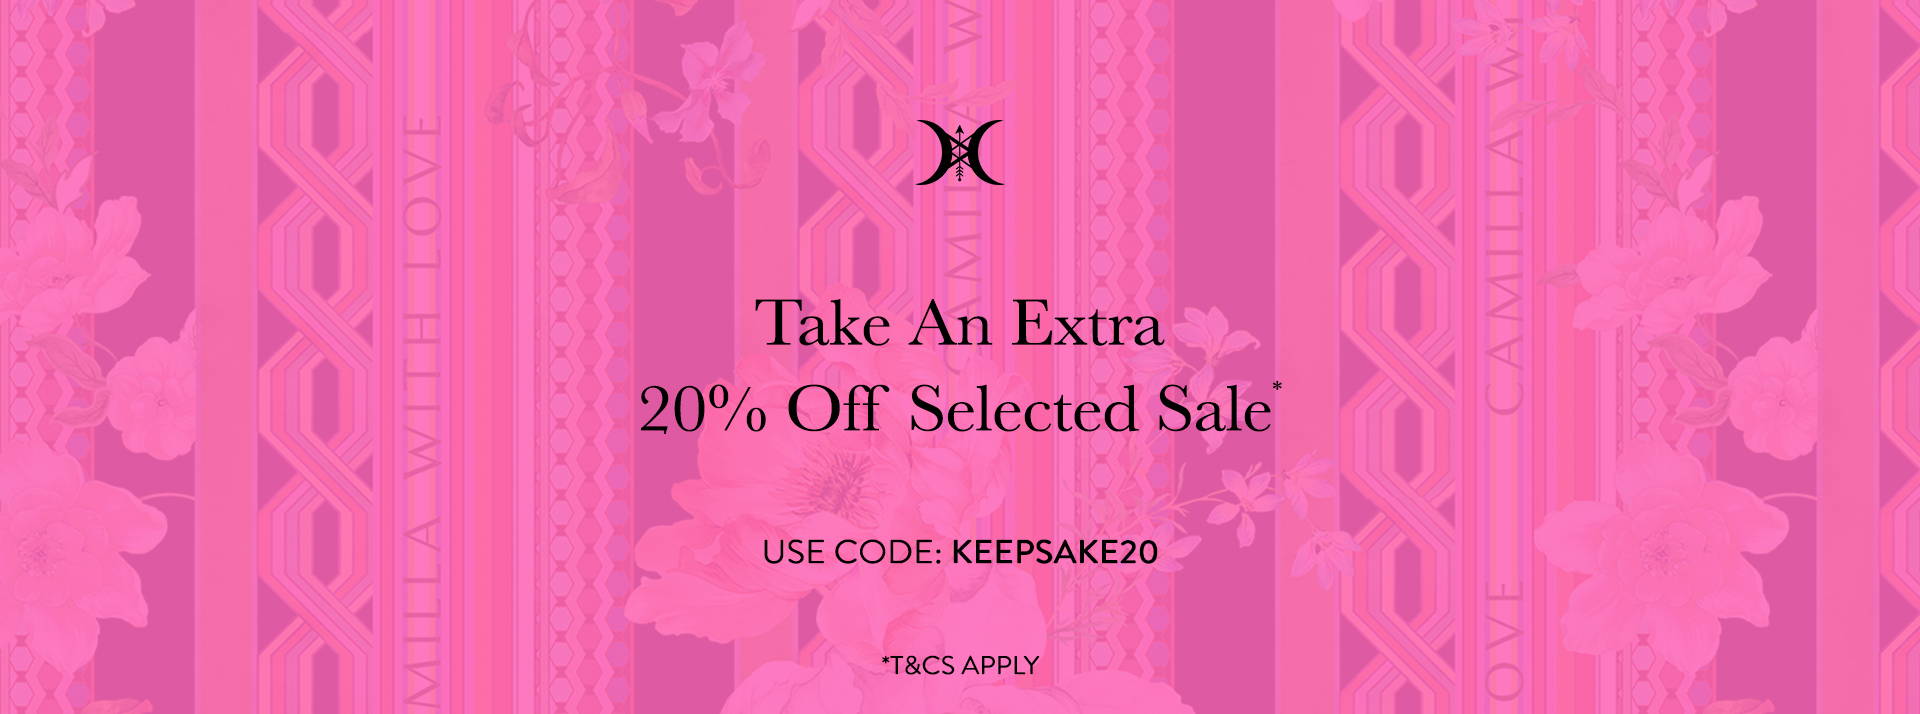 TAKE AN EXTRA 20% OFF SELECTED SALE* USE CODE: KEEPSAKE20 AT CHECKOUT